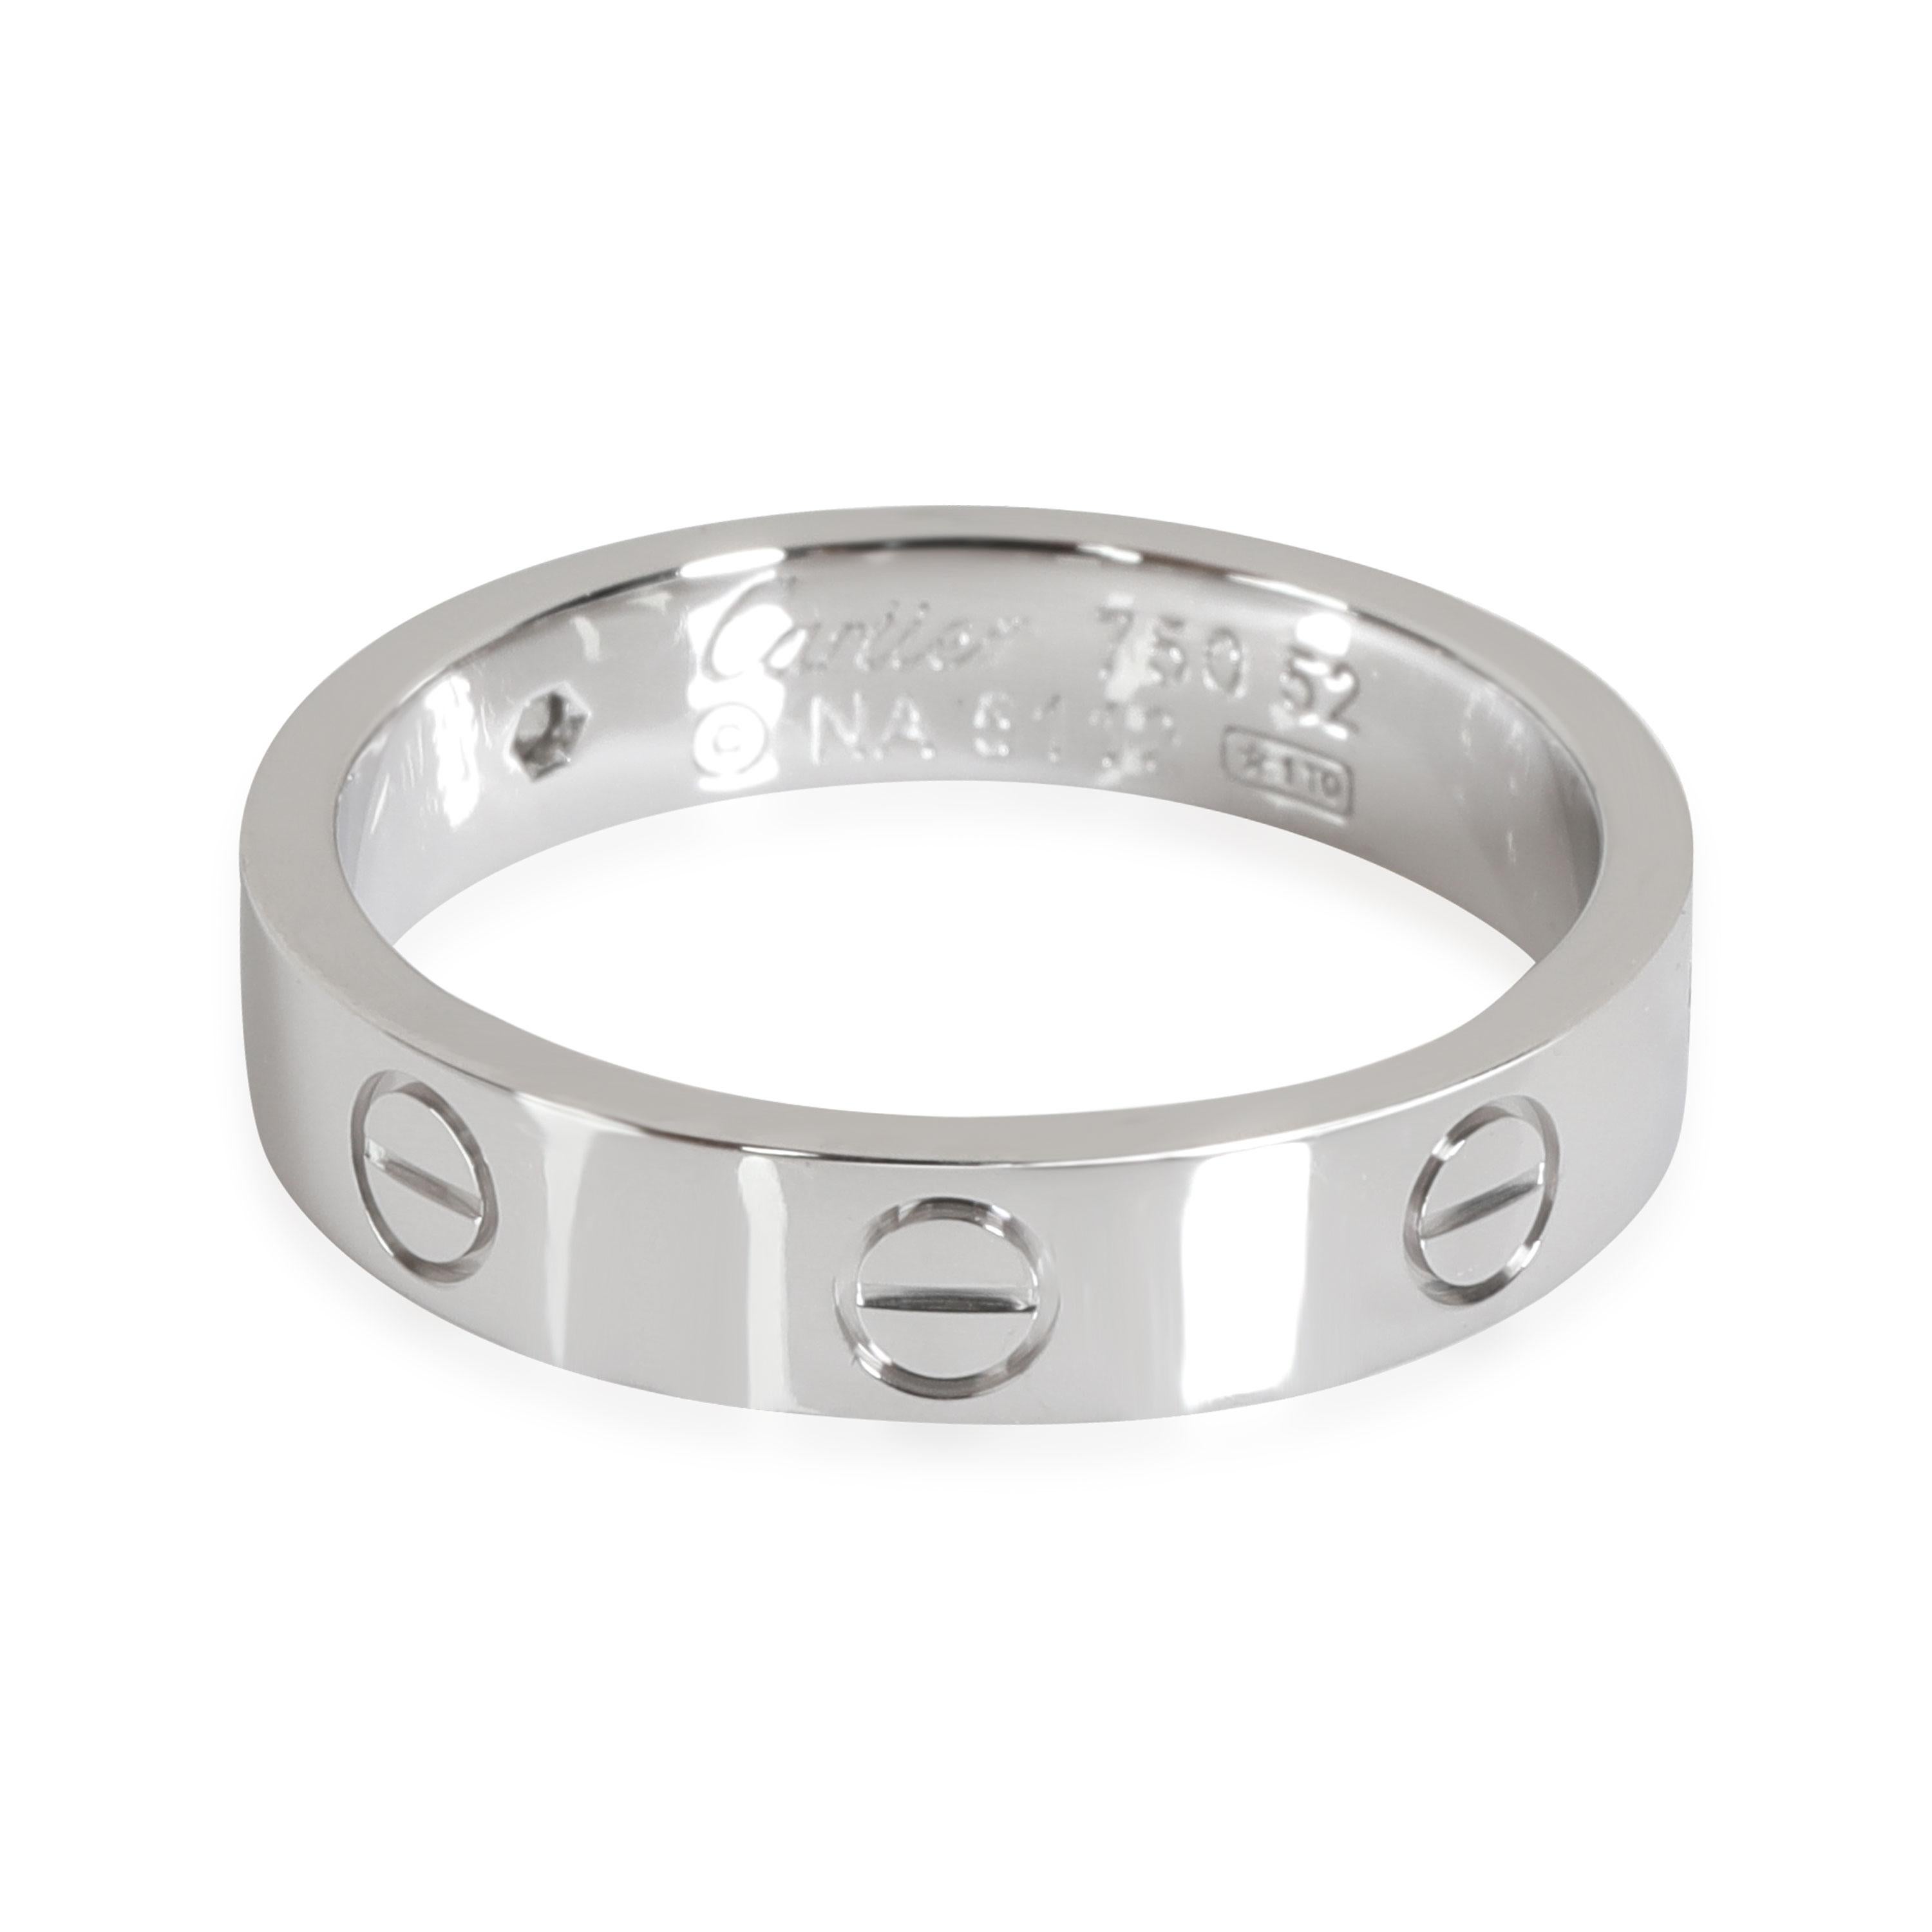 Cartier LOVE Diamond Wedding Band in 18k White Gold 0.02 CTW

PRIMARY DETAILS
SKU: 116138
Listing Title: Cartier LOVE Diamond Wedding Band in 18k White Gold 0.02 CTW
Condition Description: Retails for 2370 USD. In excellent condition and recently